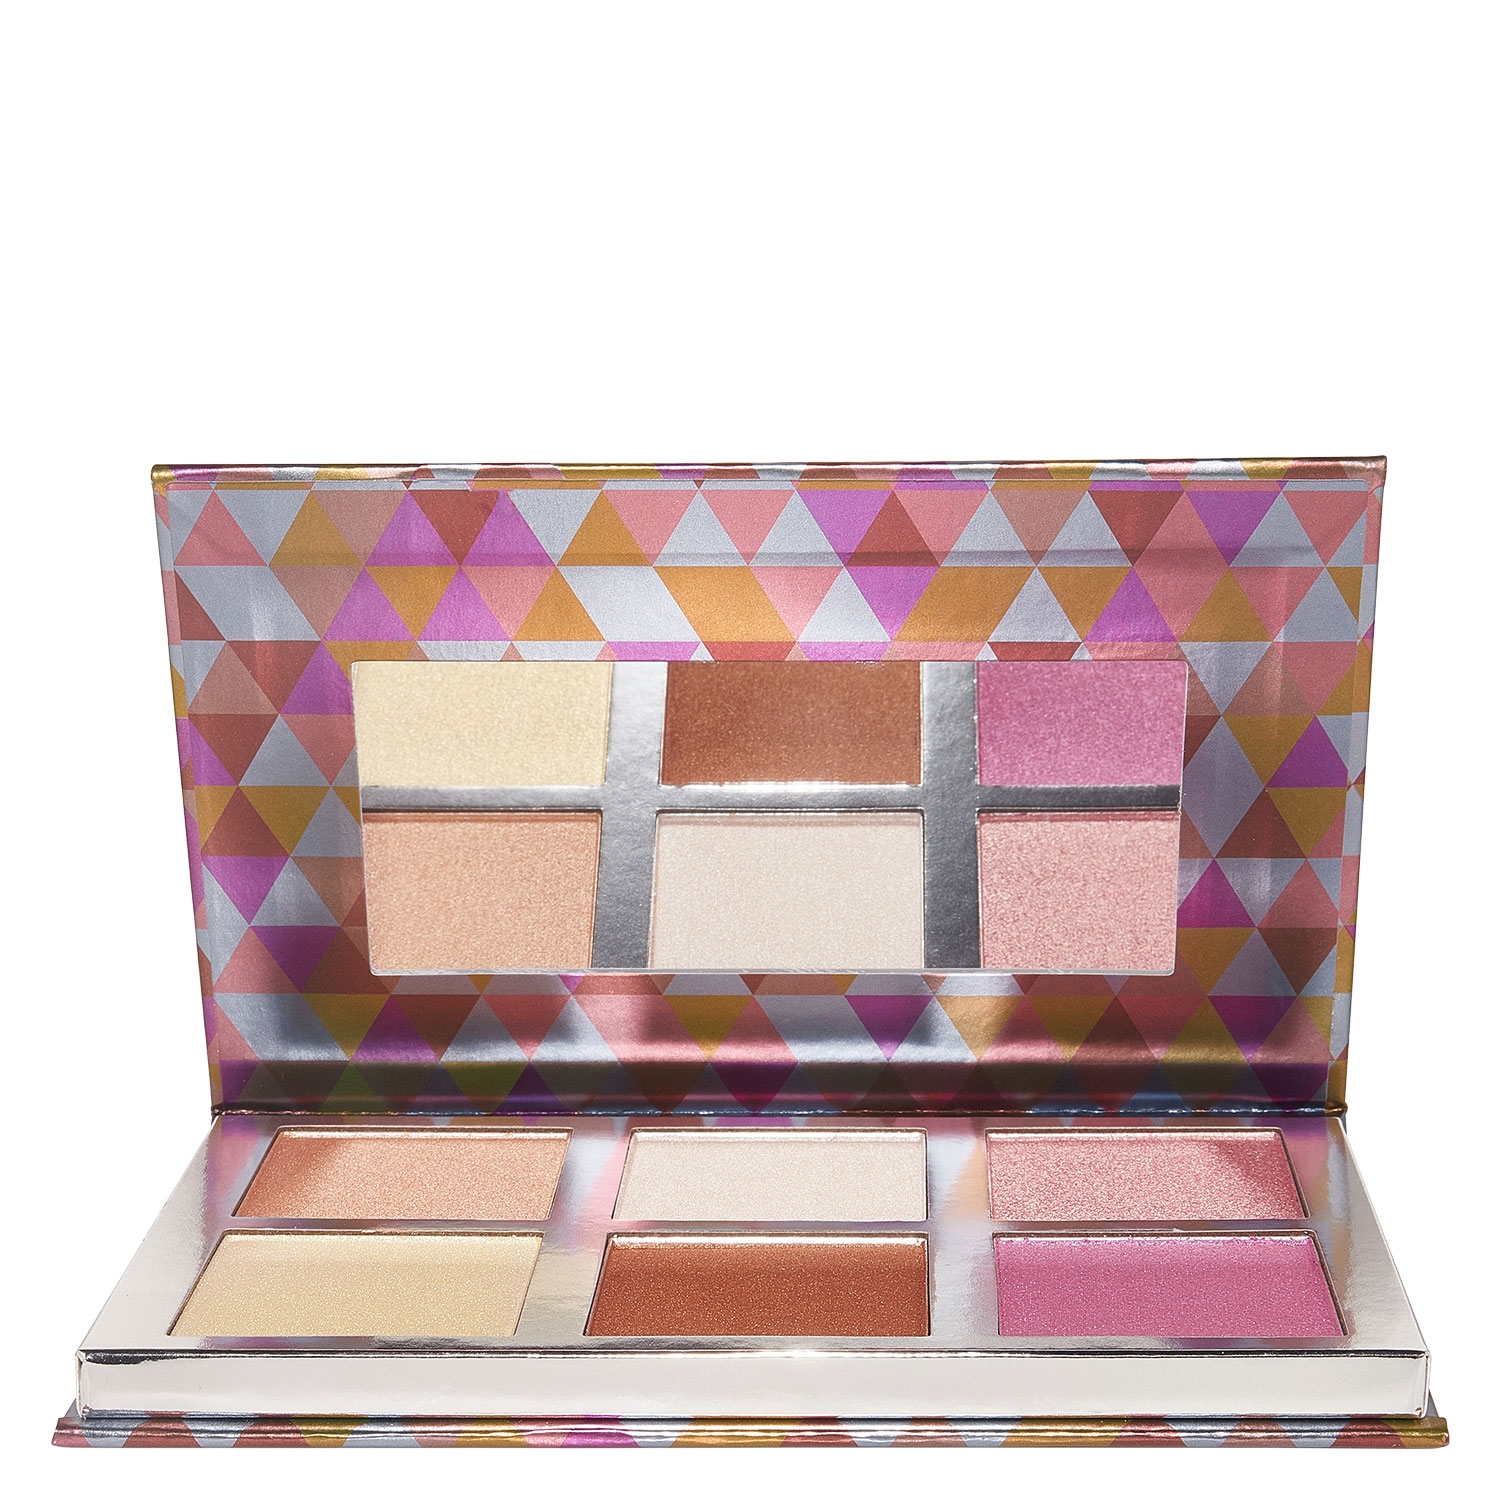 Product image from bellapierre Teint - Glowing Palette 2